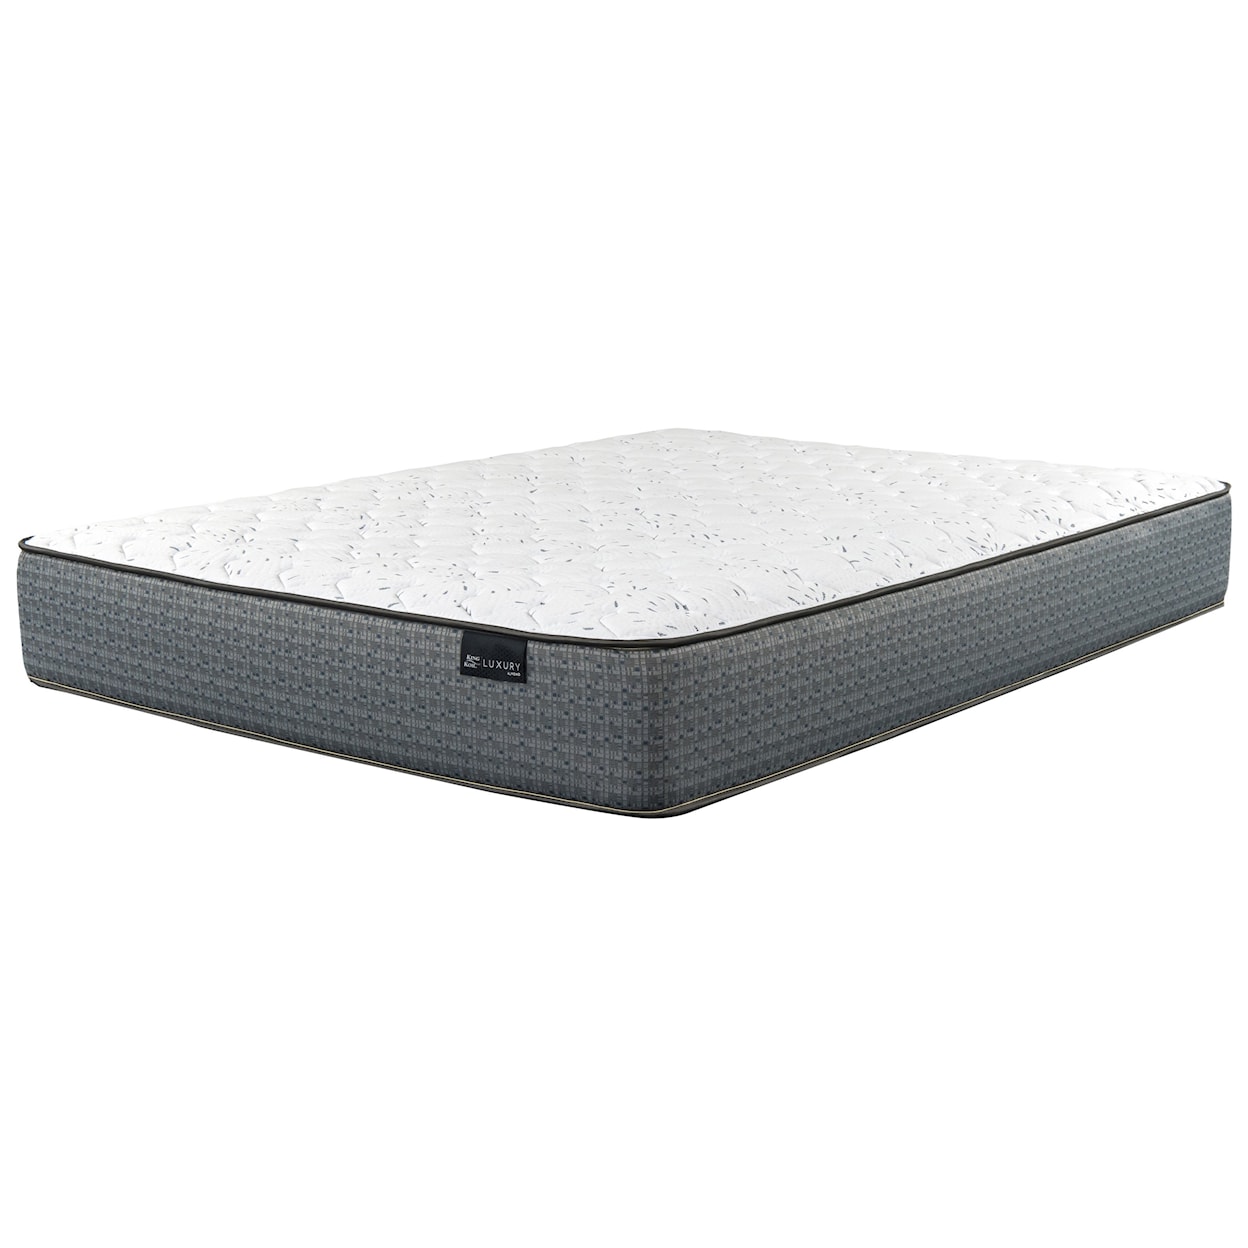 King Koil Almond Firm Twin Firm Encased Coil Mattress